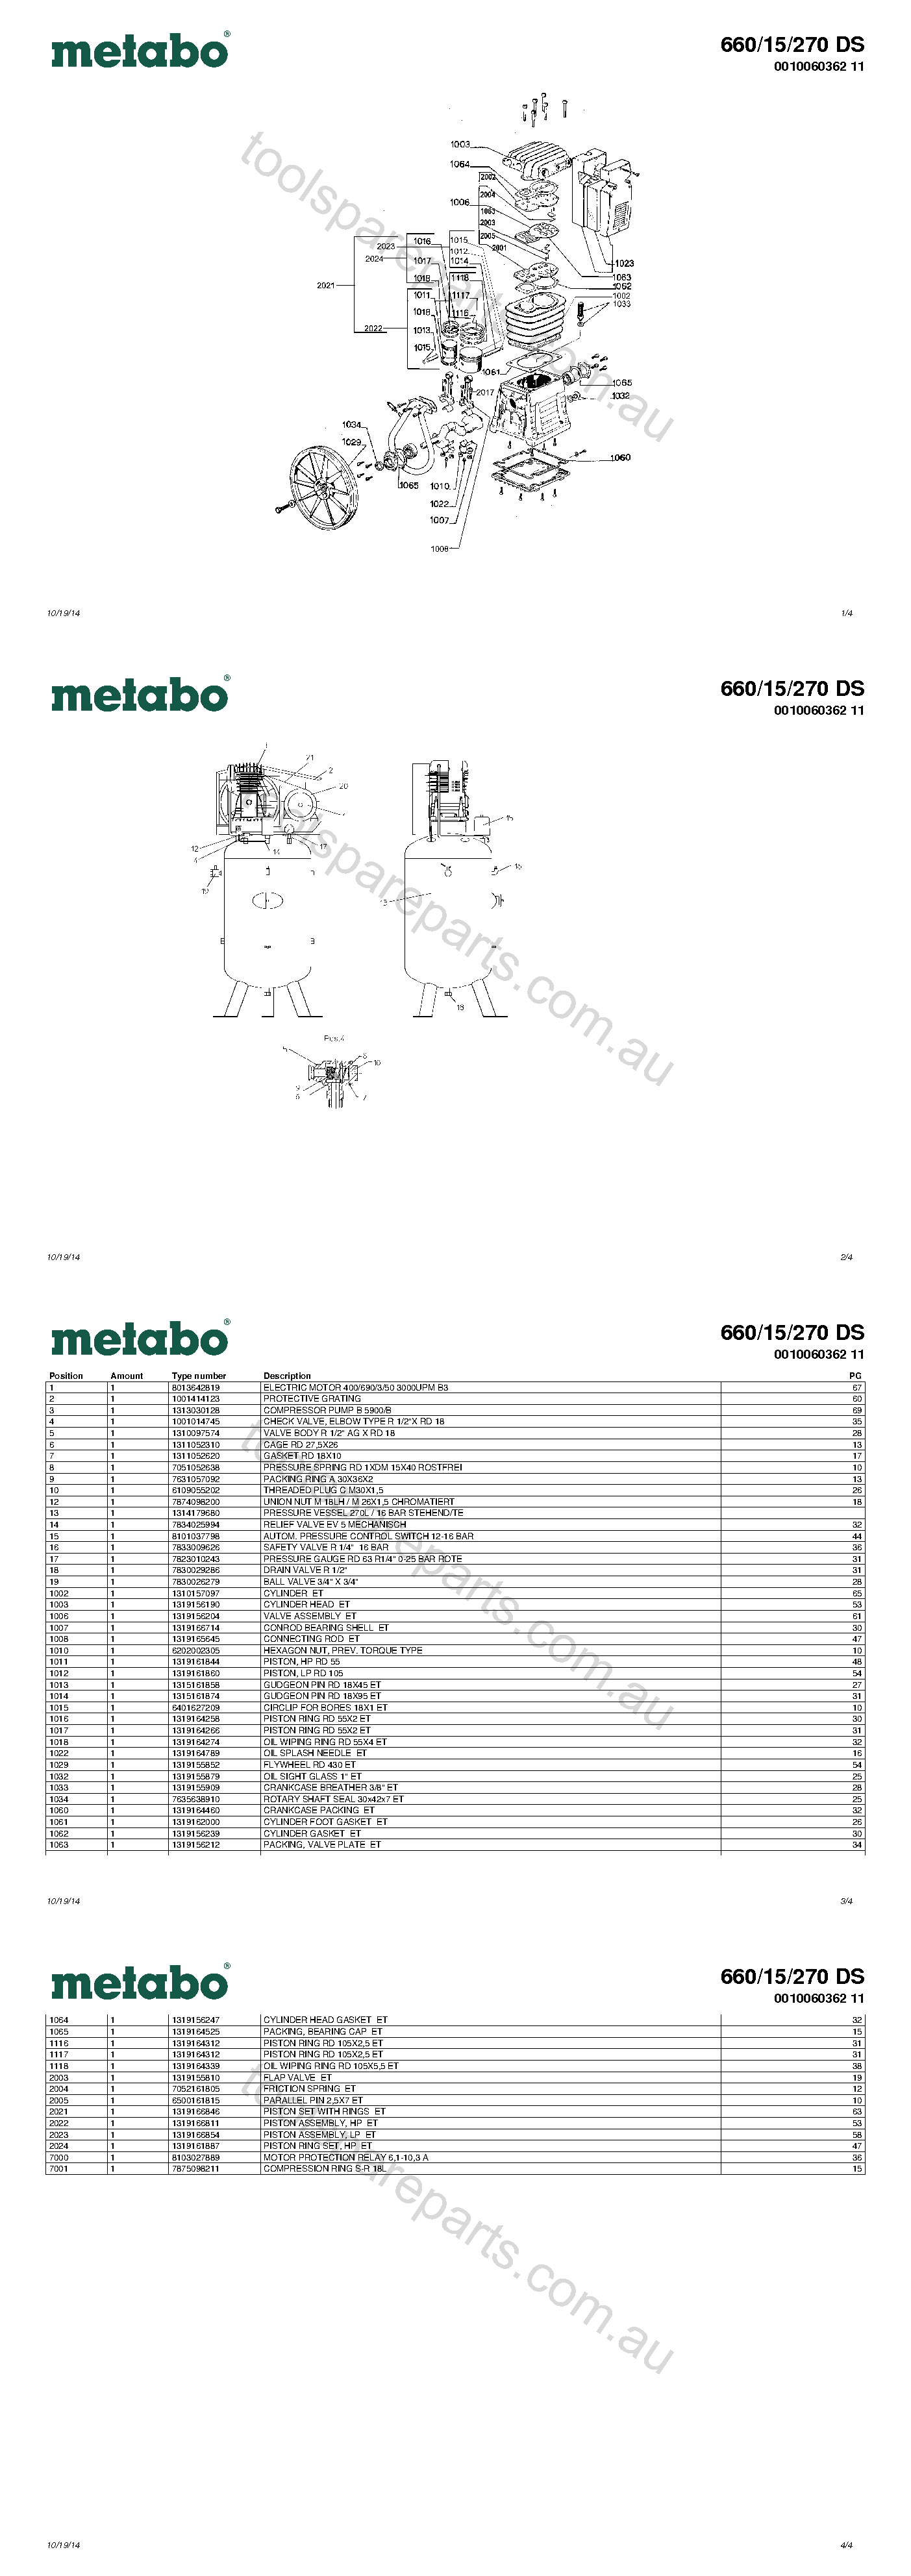 Metabo 660/15/270 DS 0010060362 11  Diagram 1